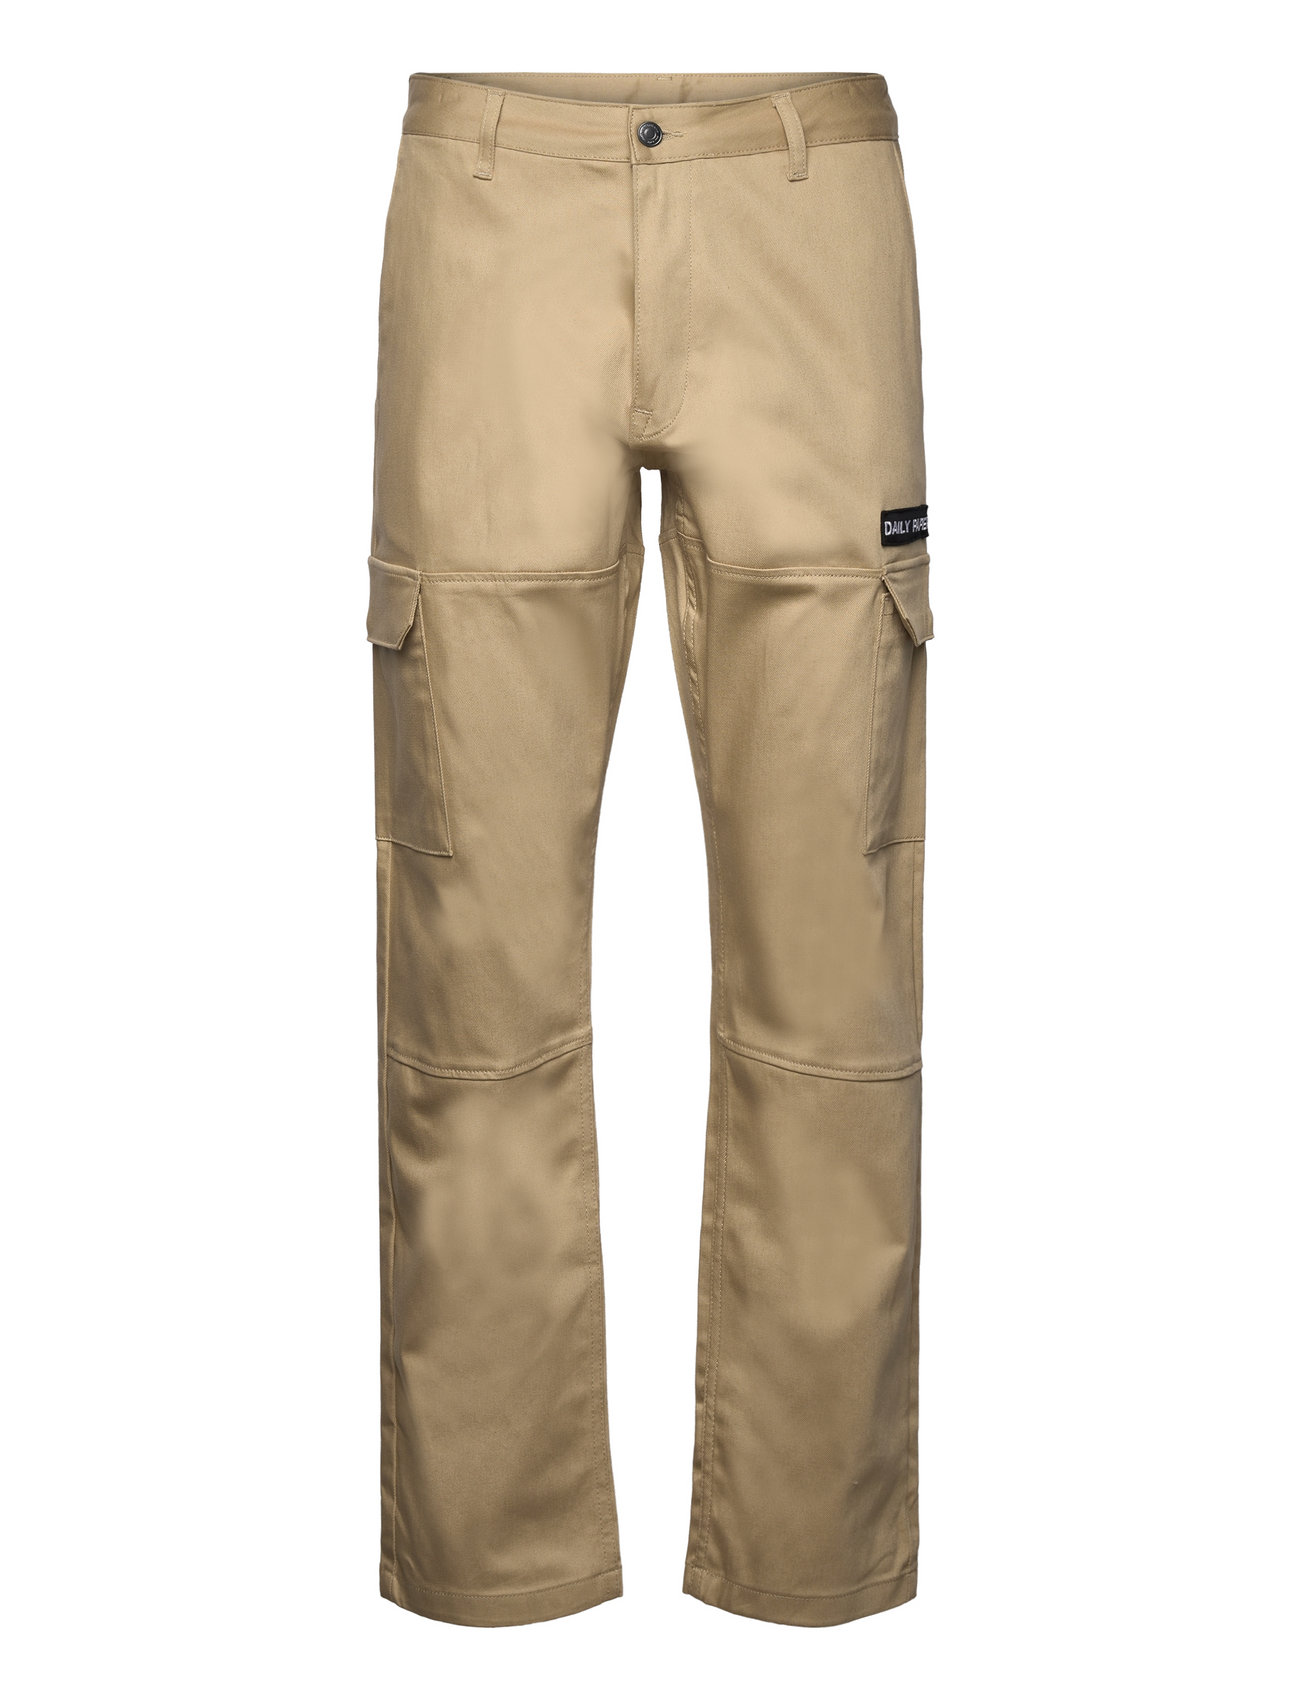 Daily Paper Unisex Slim Cargo Pants Style 3105 Size XS Street Wear Gray  conbral.com.br